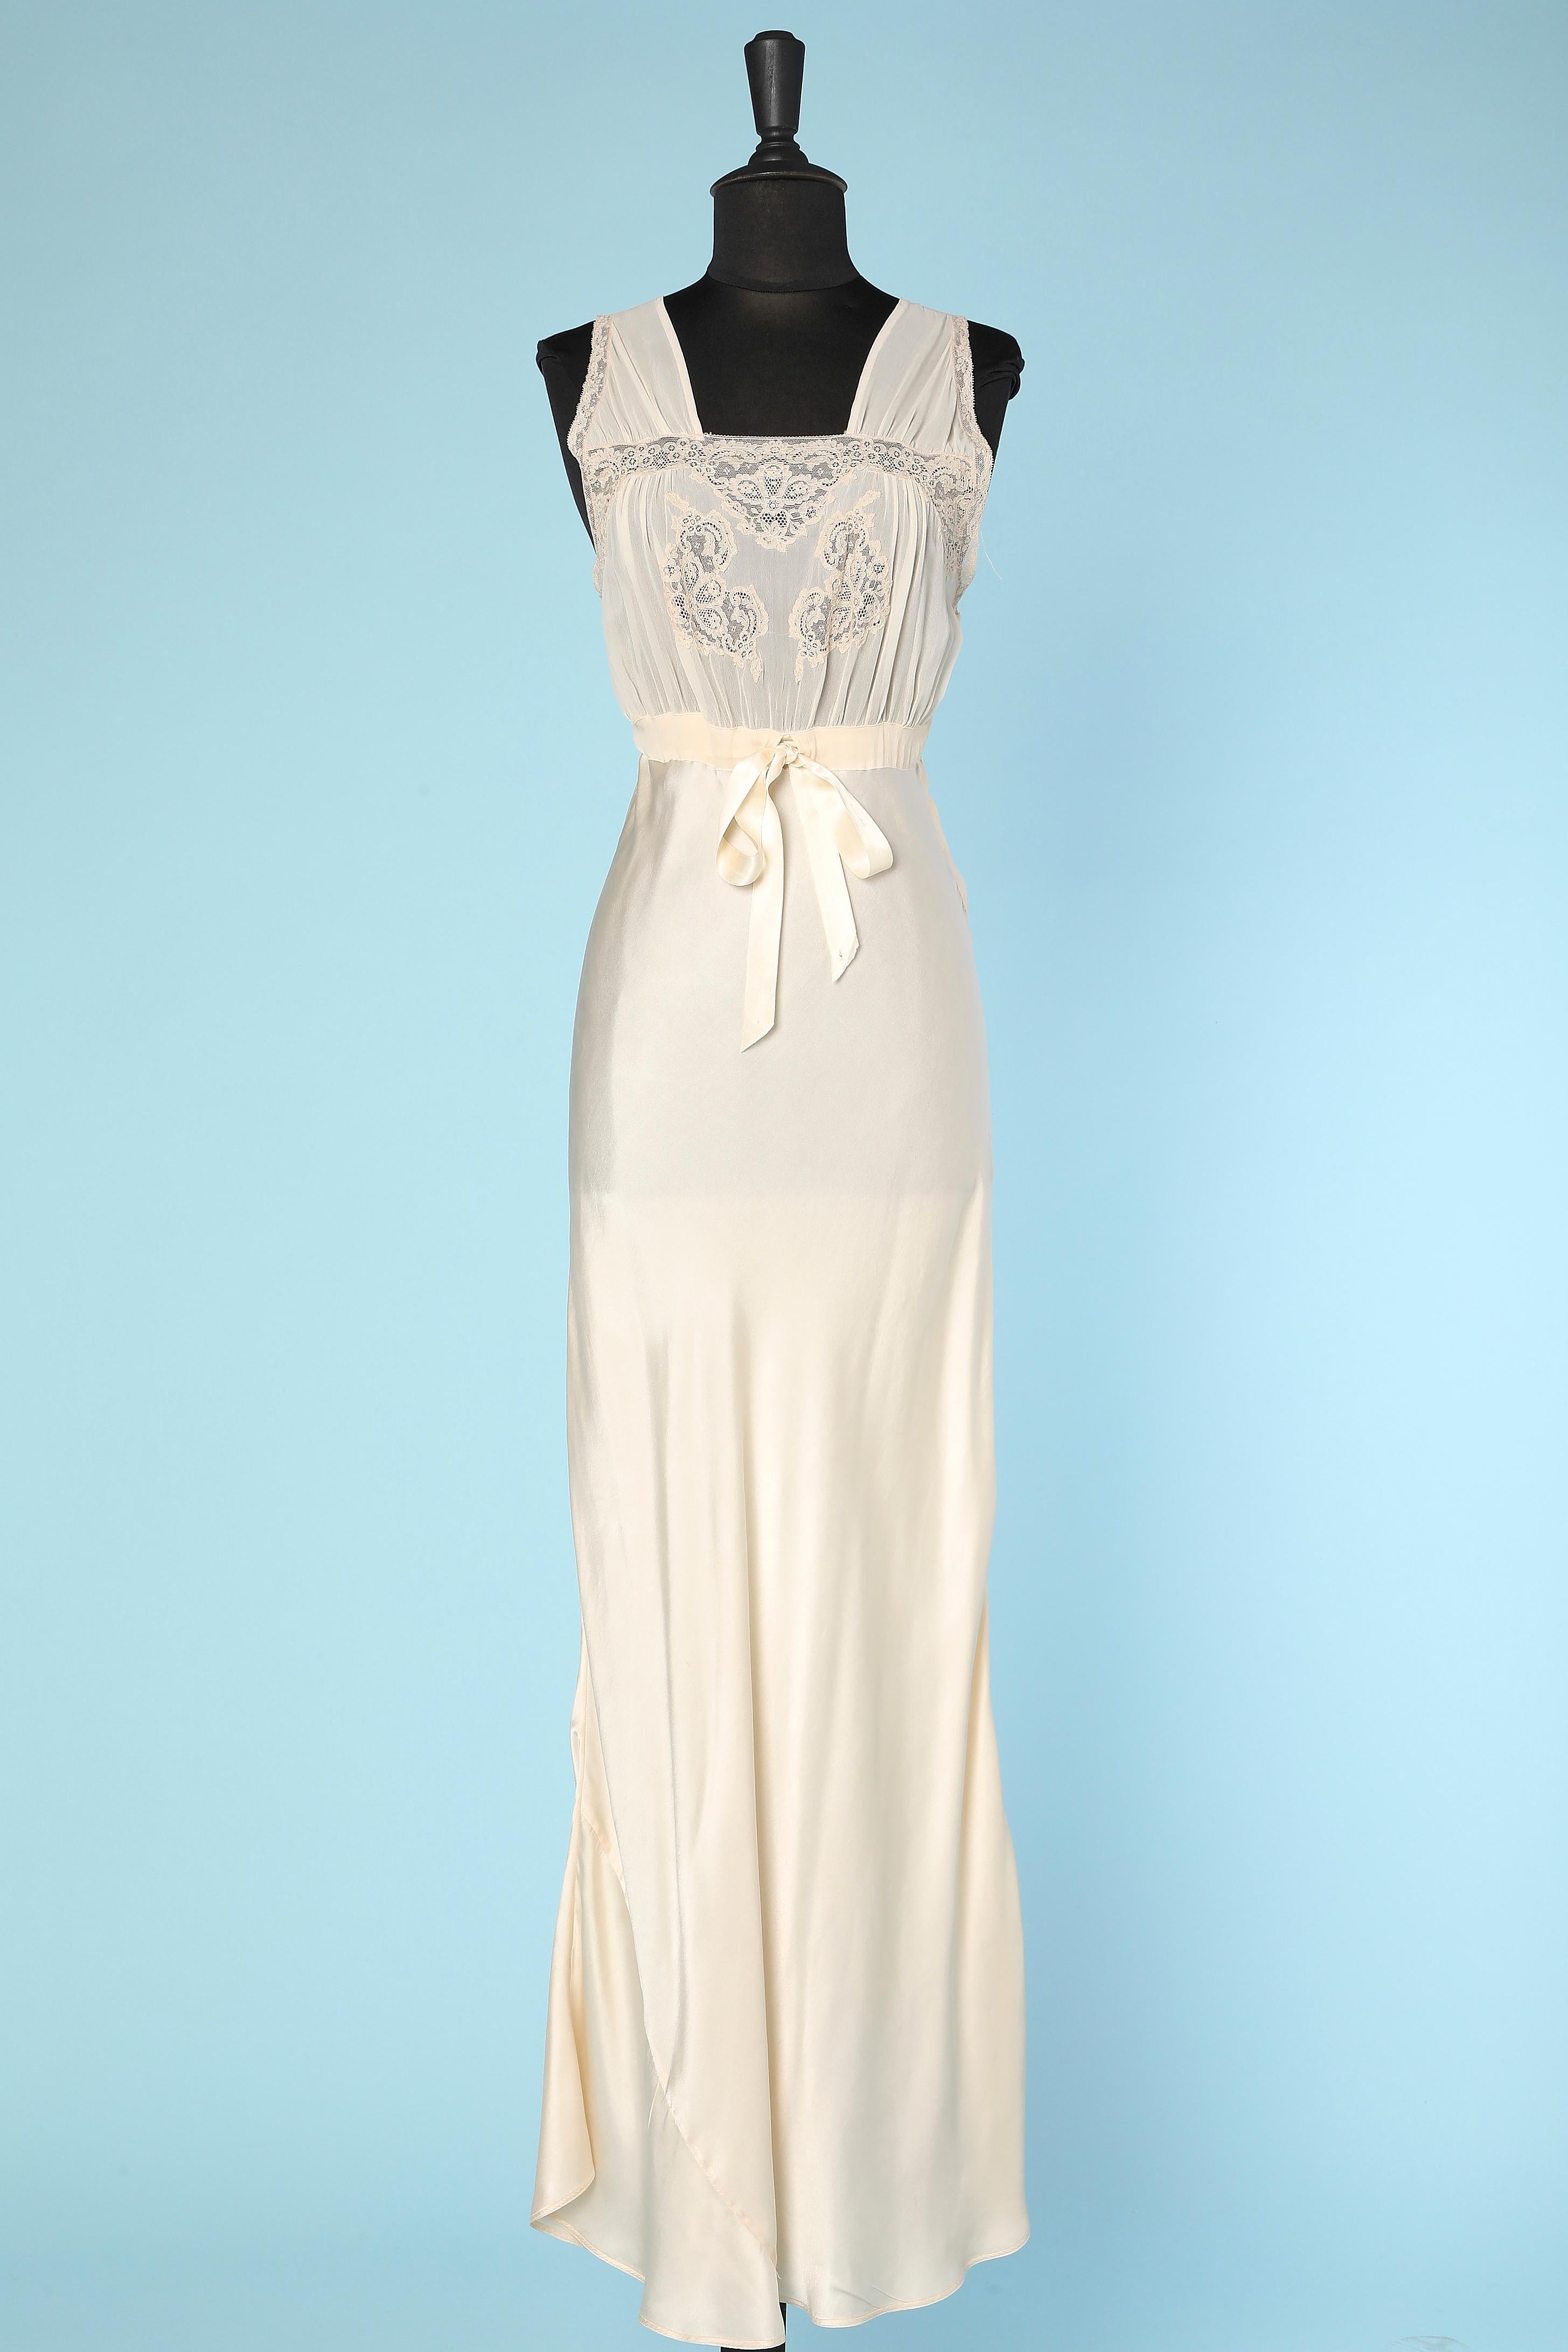 White Ensemble Robe and night gown in silk and lace appliqué By Lady Duff Circa 1930 For Sale